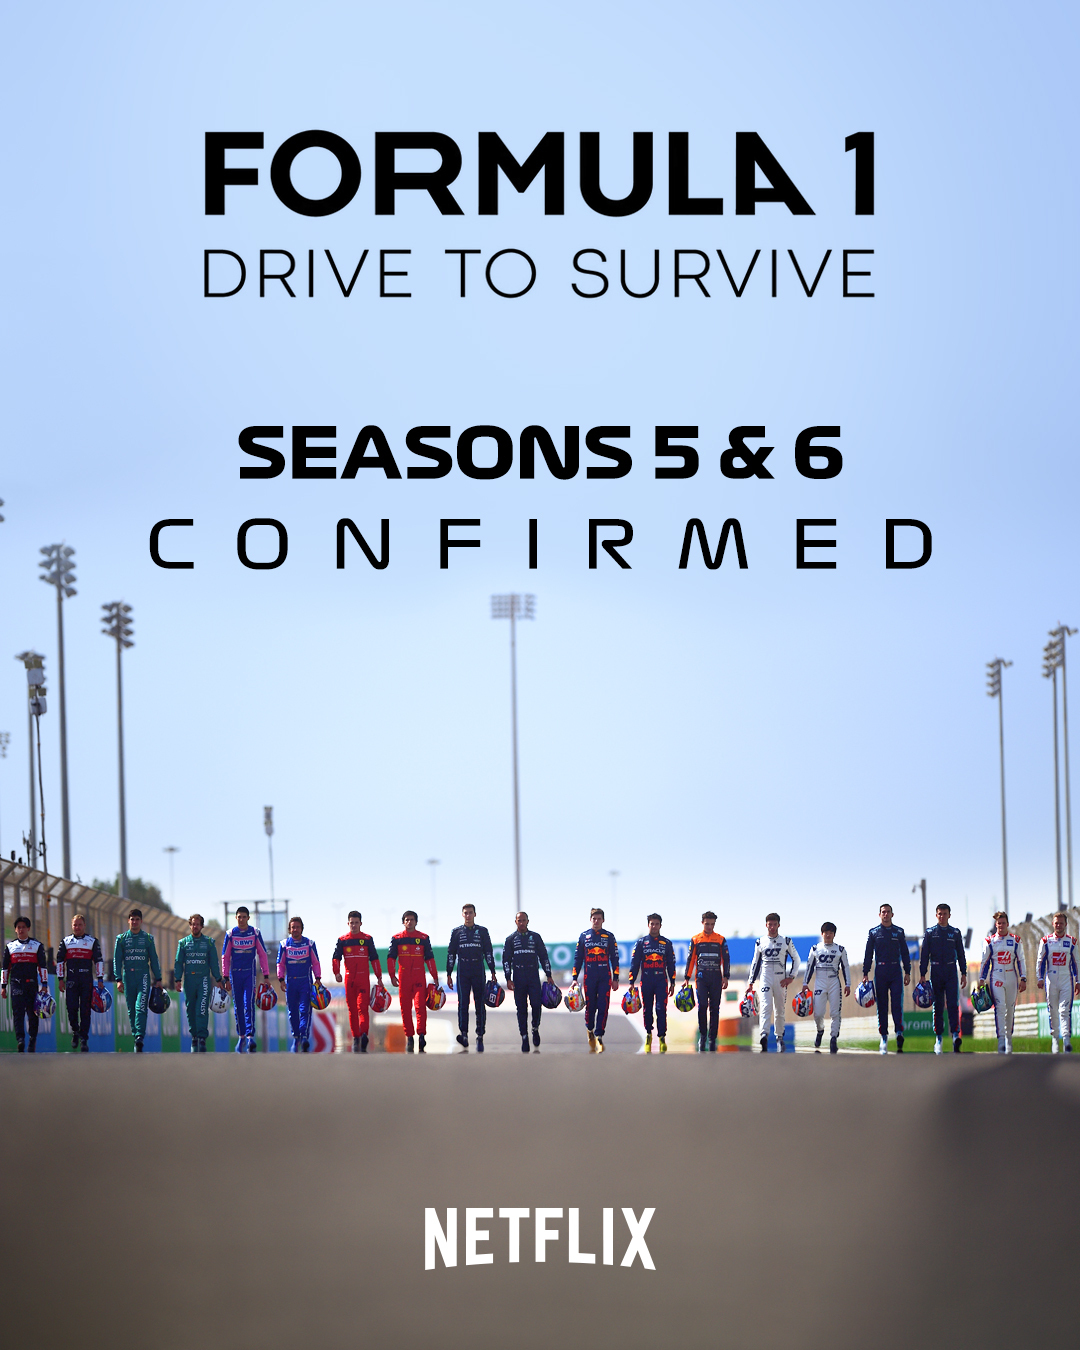 Formula 1 Drive to Survive Confirmed for a 5th and 6th Season on Netflix 